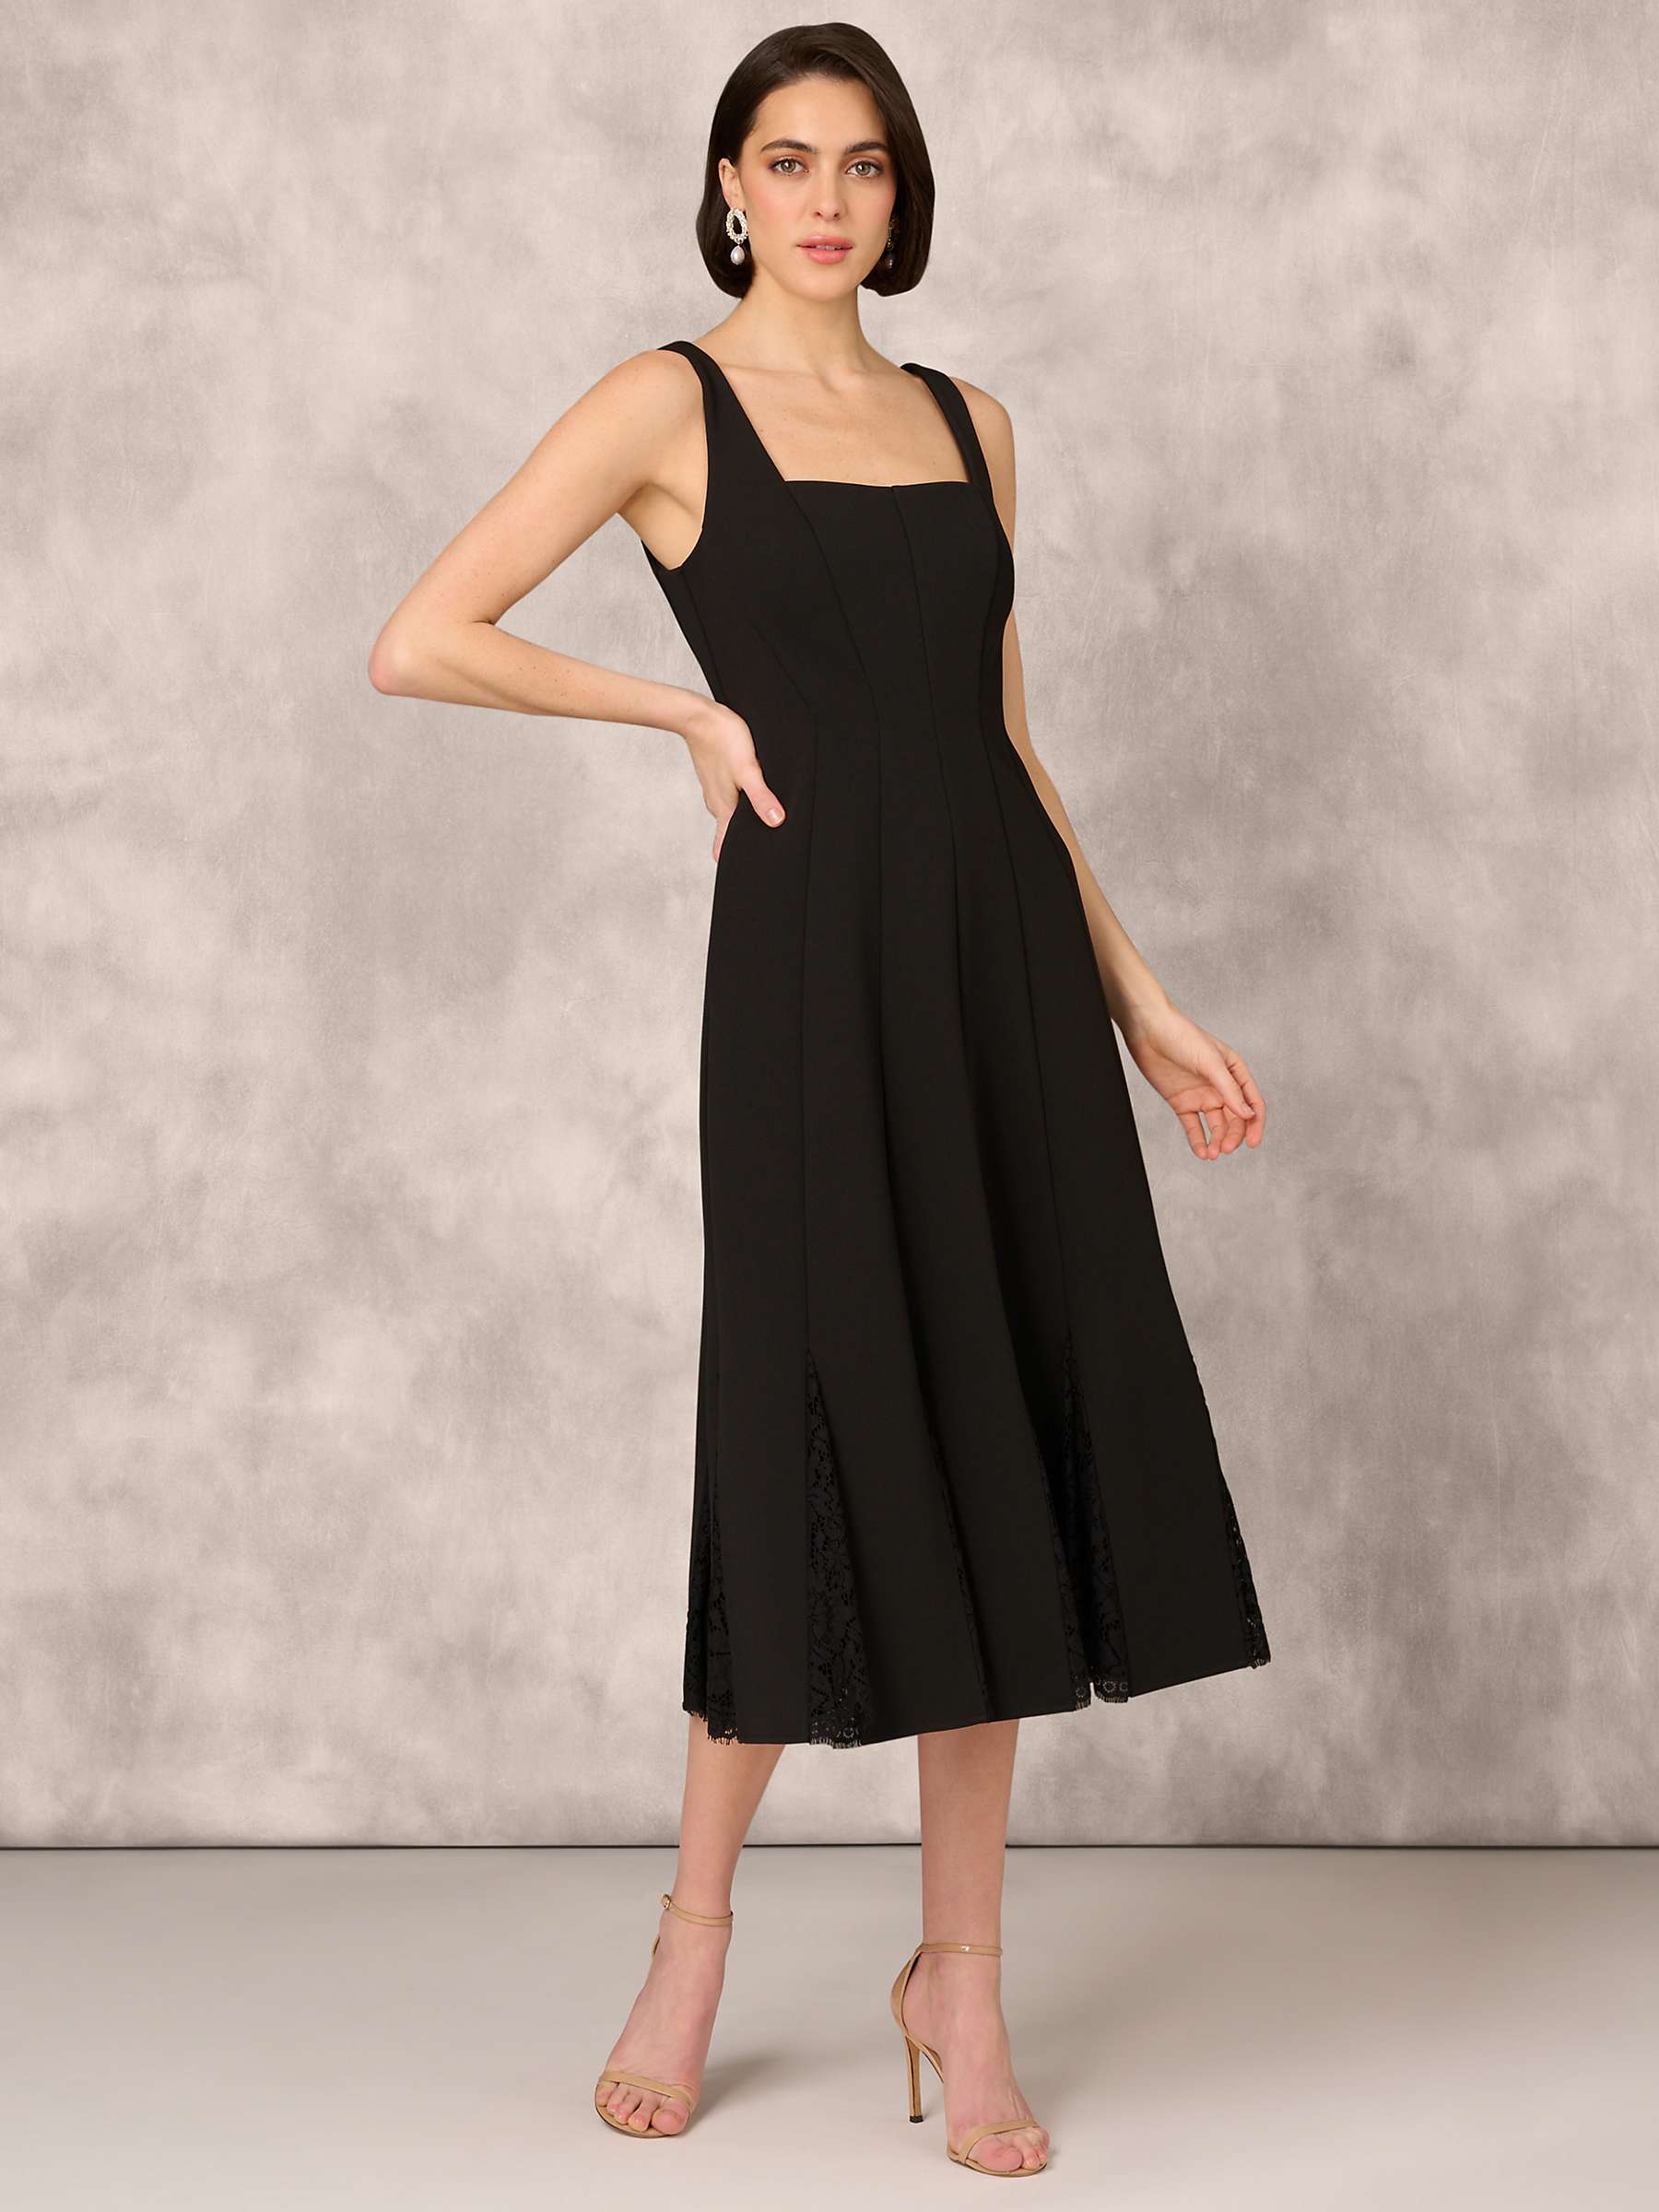 Buy Aidan Mattox by Adrianna Papell Bonded Crepe Midi Dress, Black Online at johnlewis.com